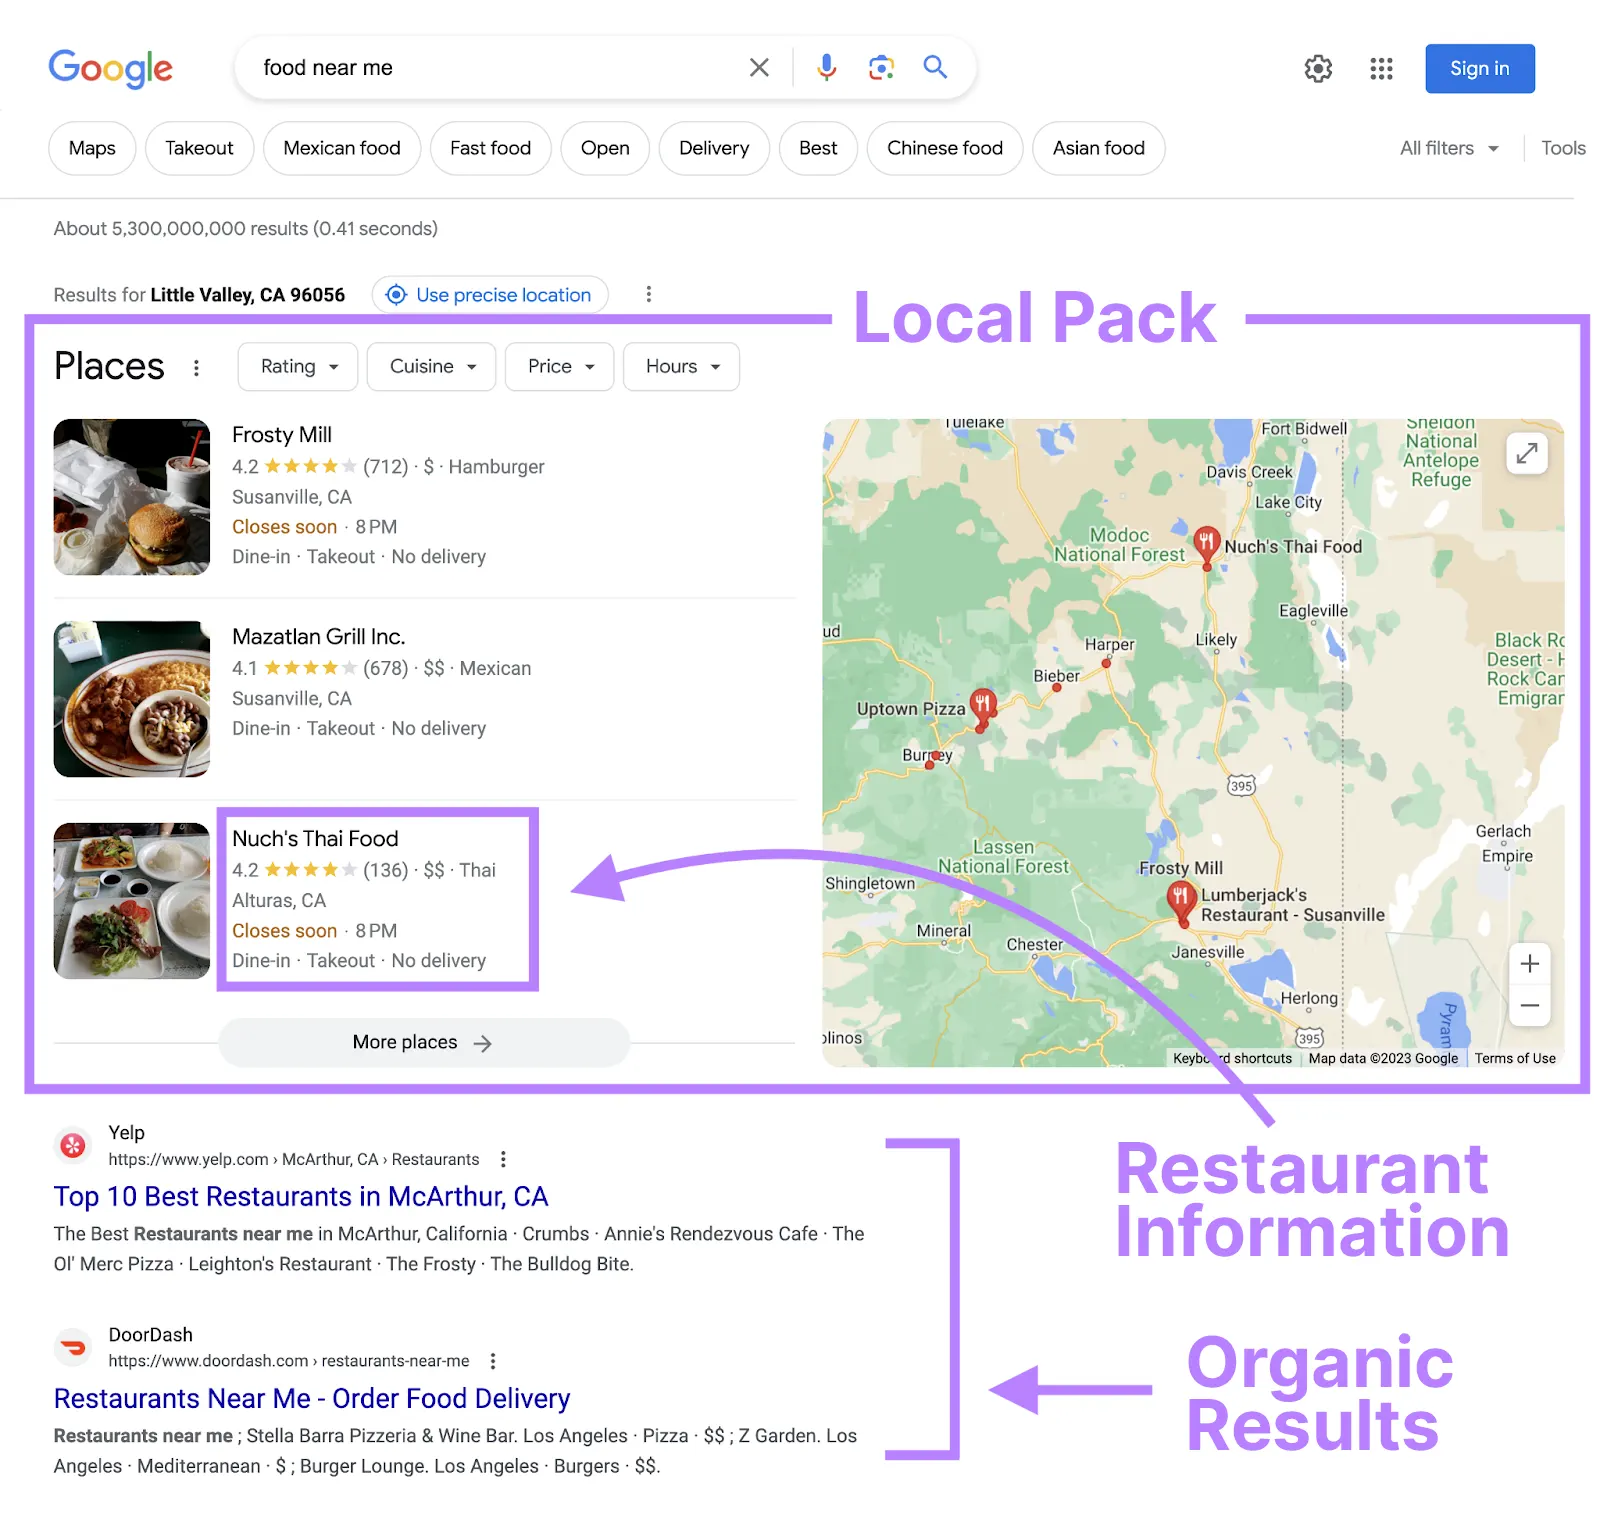 Google SERP of the "food near me" keyword, with the restaurant information within the "Places" Local Pack highlighted.